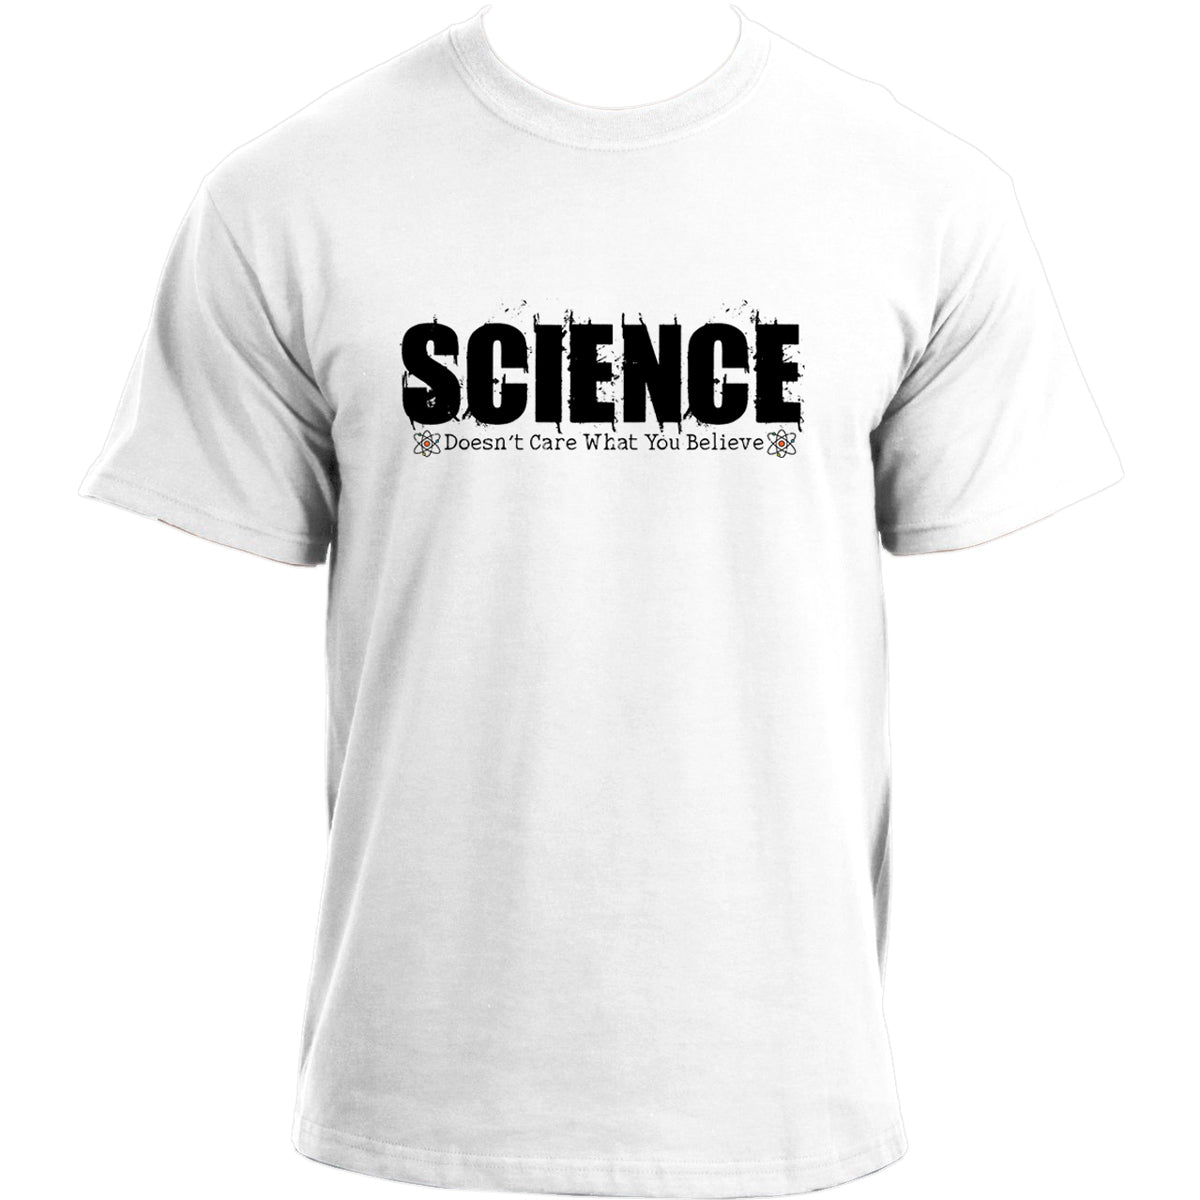 Science Doesn't Care What You Believe T Shirt I Nerd Geek Chemistry Math Physics T-Shirt